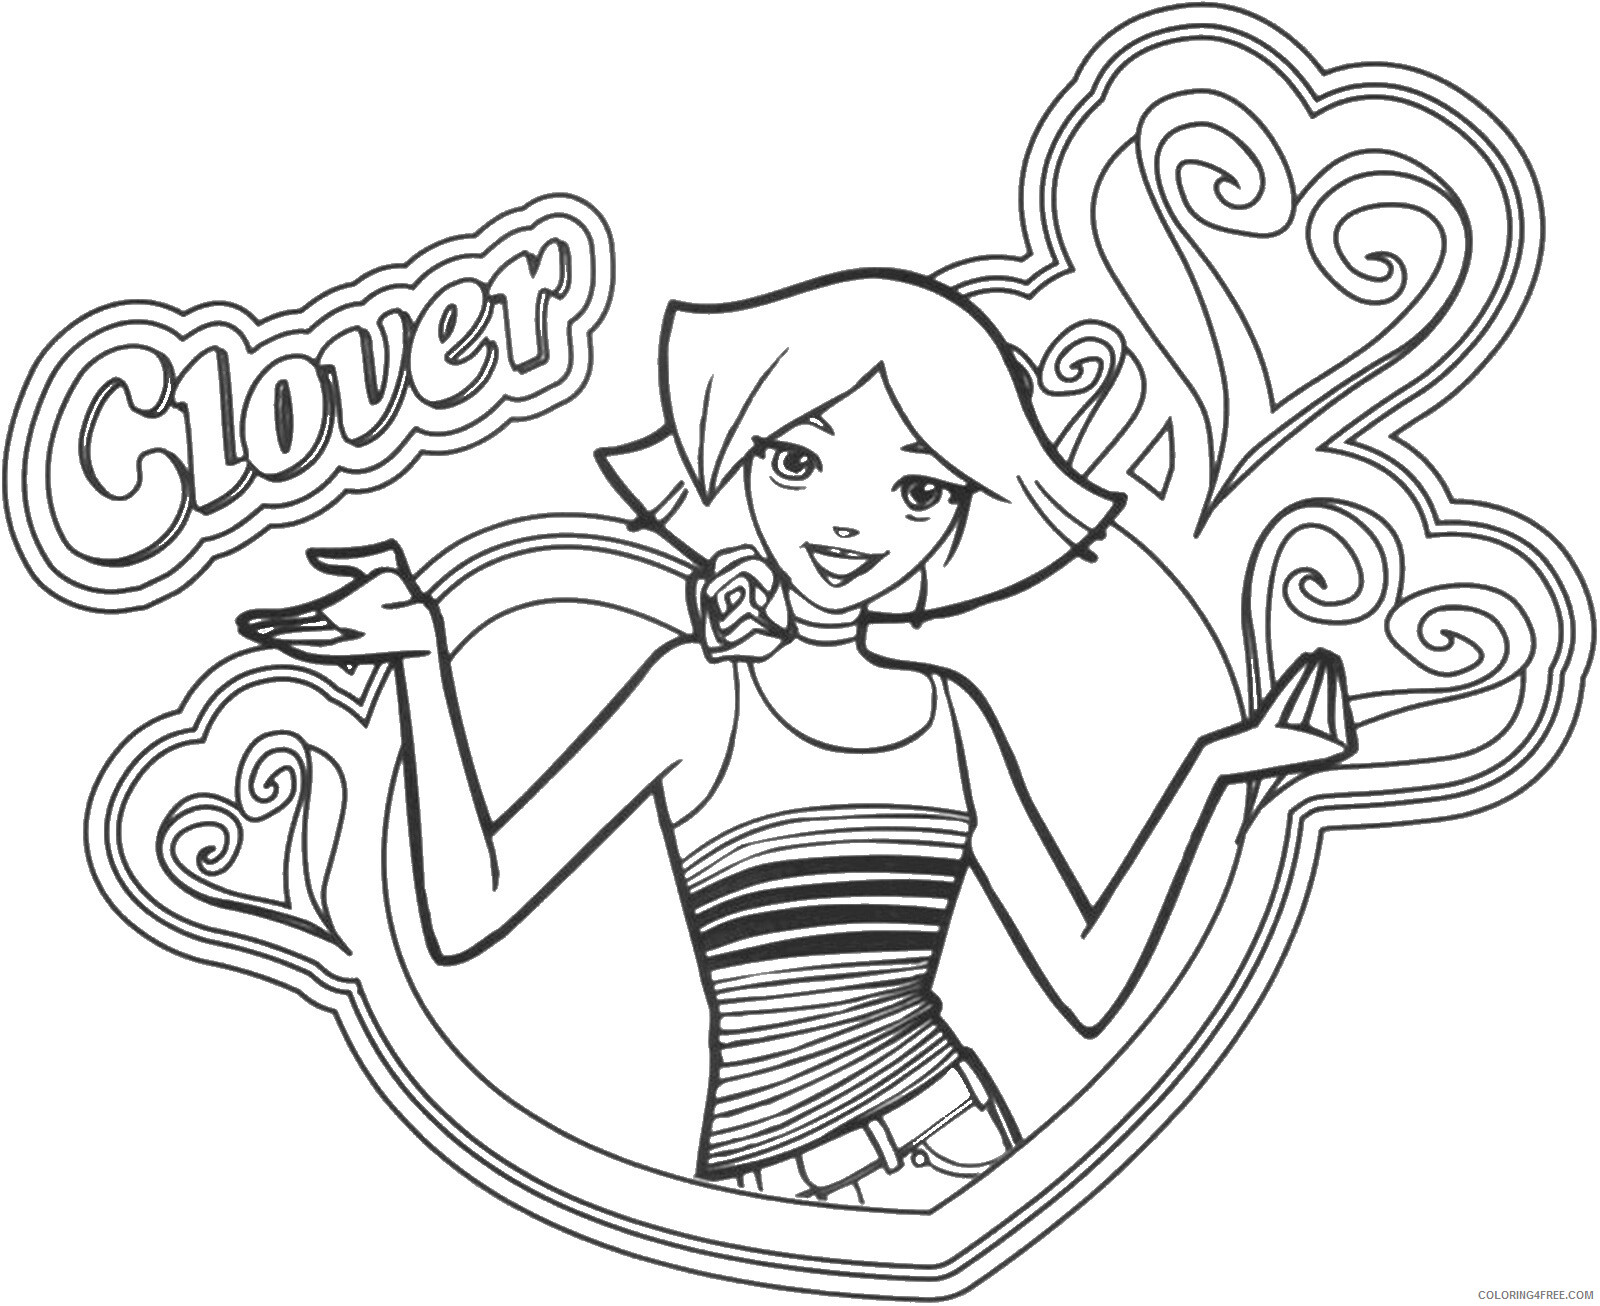 Totally Spies Coloring Pages TV Film totally_spies_cl28 Printable 2020 10288 Coloring4free